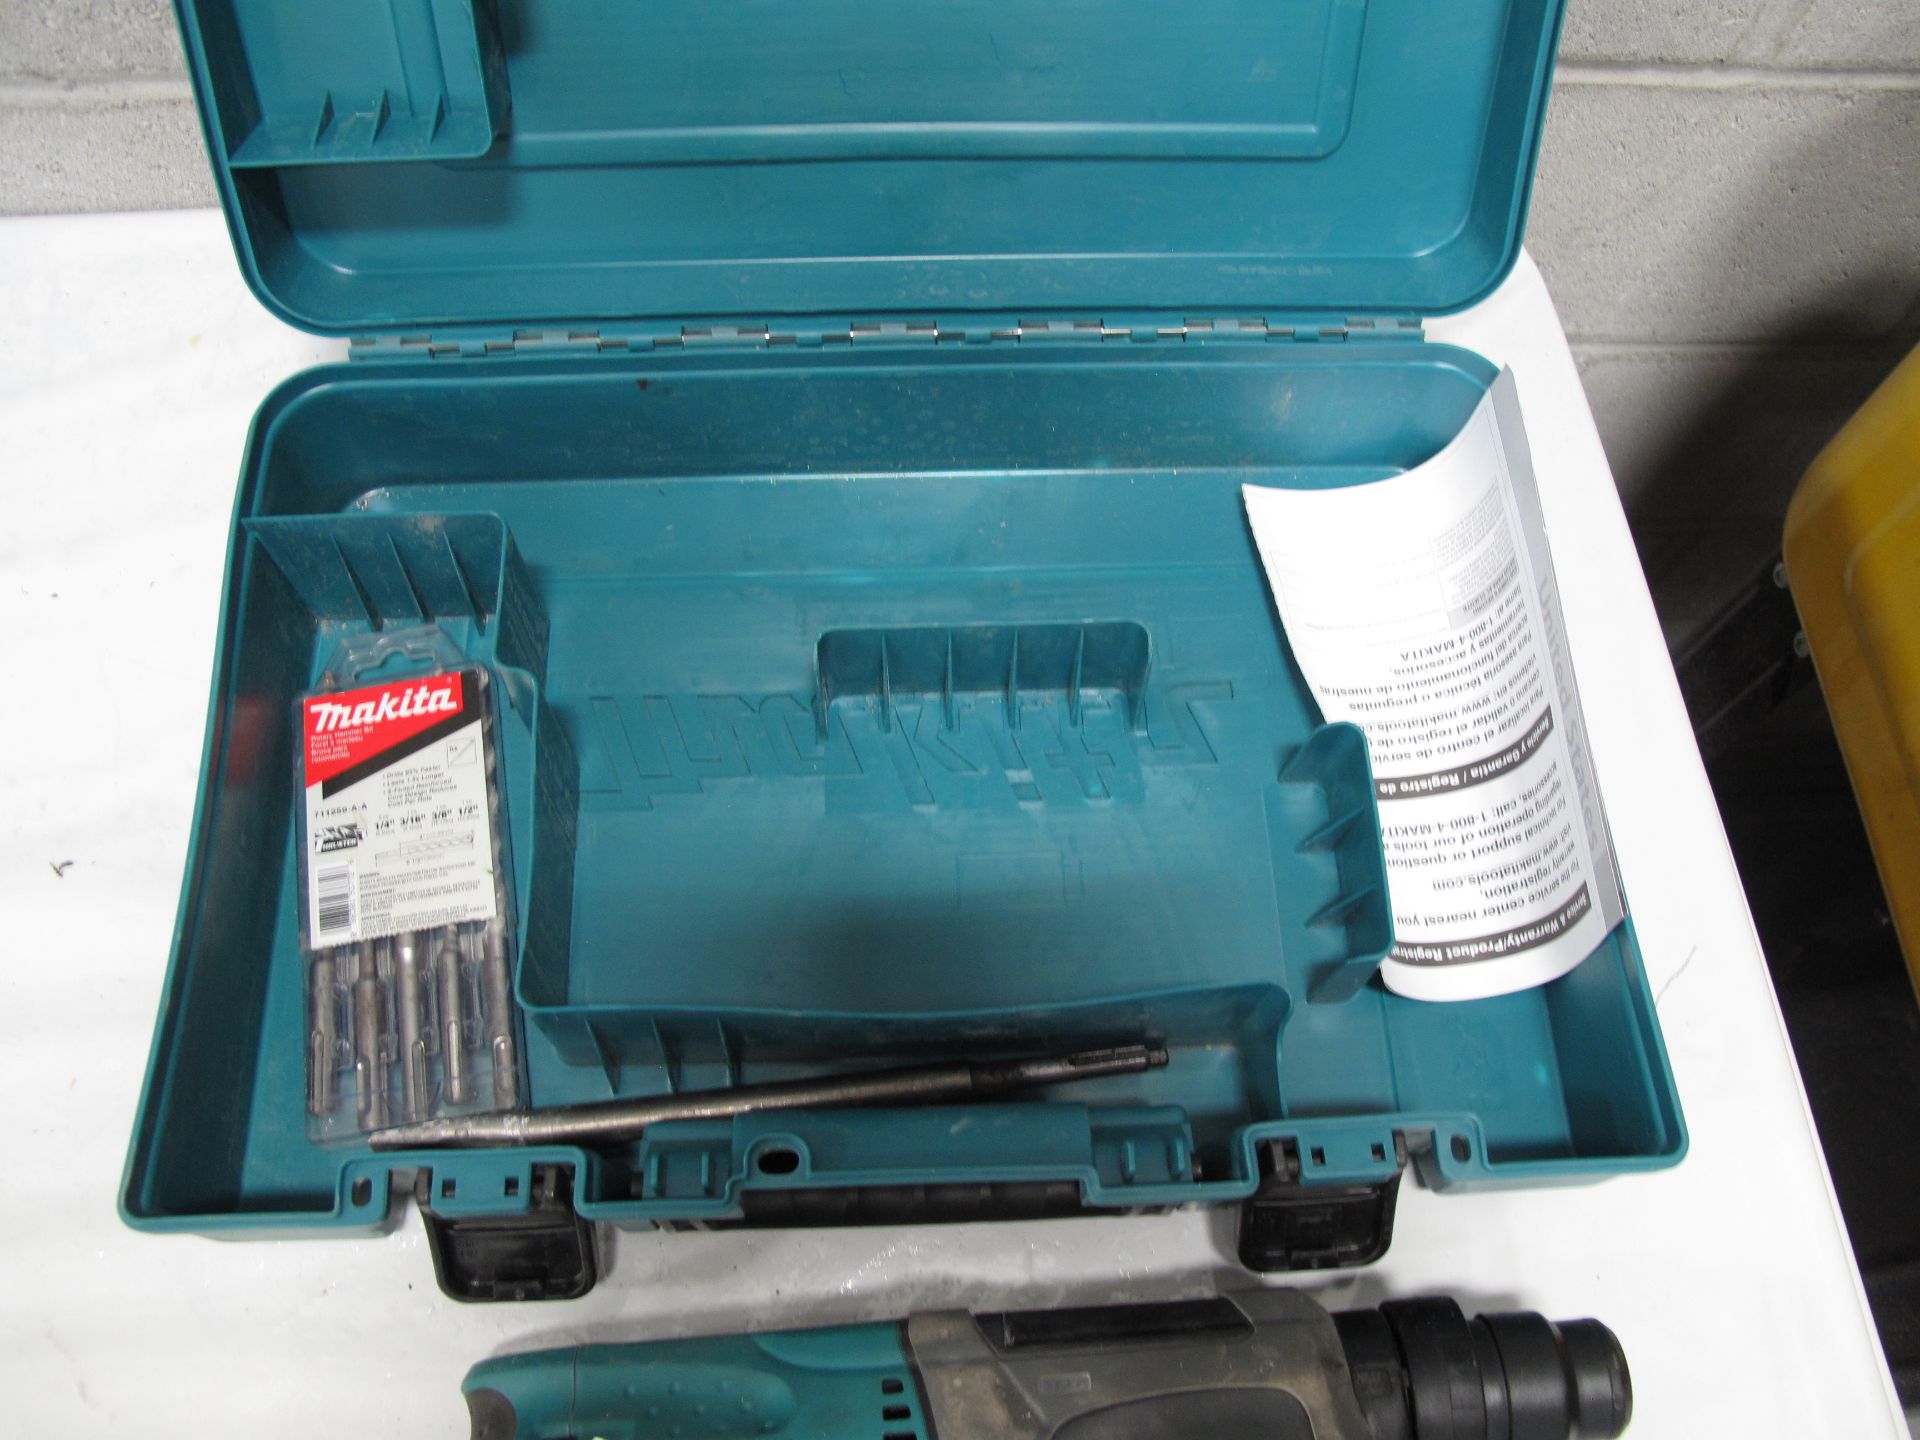 MAKITA, HR2470FX1, 24MM, ROTARY HAMMER DRILL WITH CASE, 4,500 RPM, 6.7 AMP, 110 VAC - Image 4 of 5